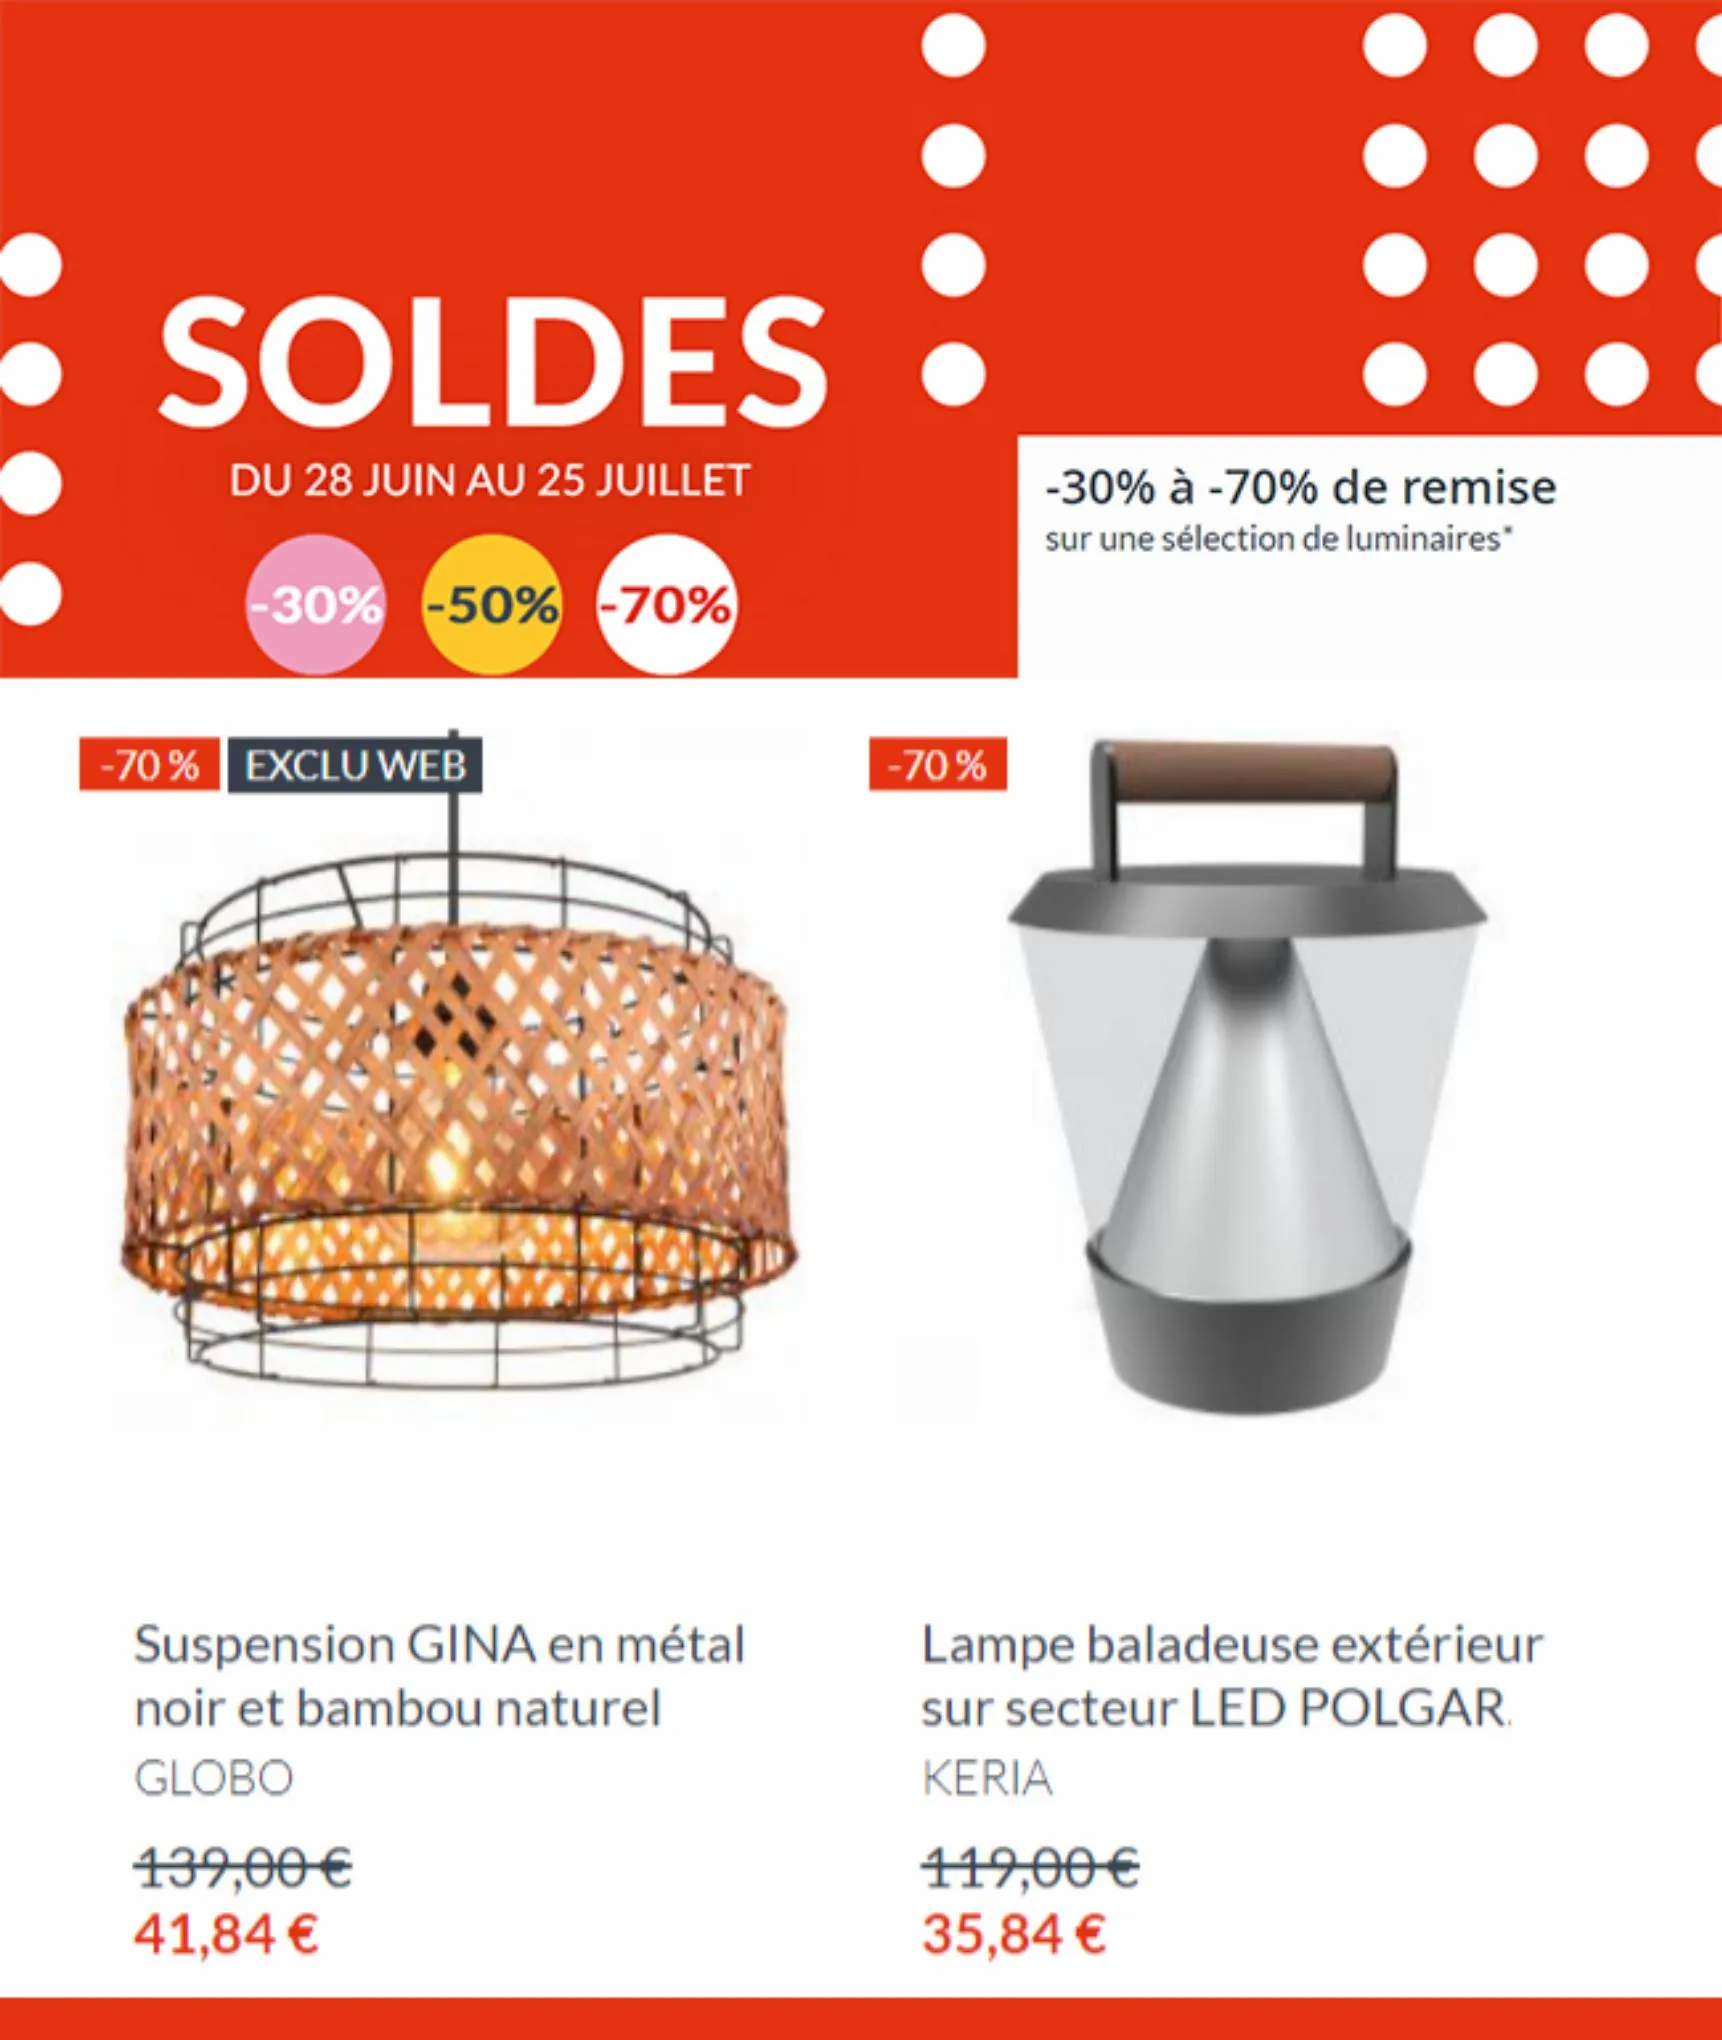 Catalogue Soldes Speciales Keria Luminaires, page 00004